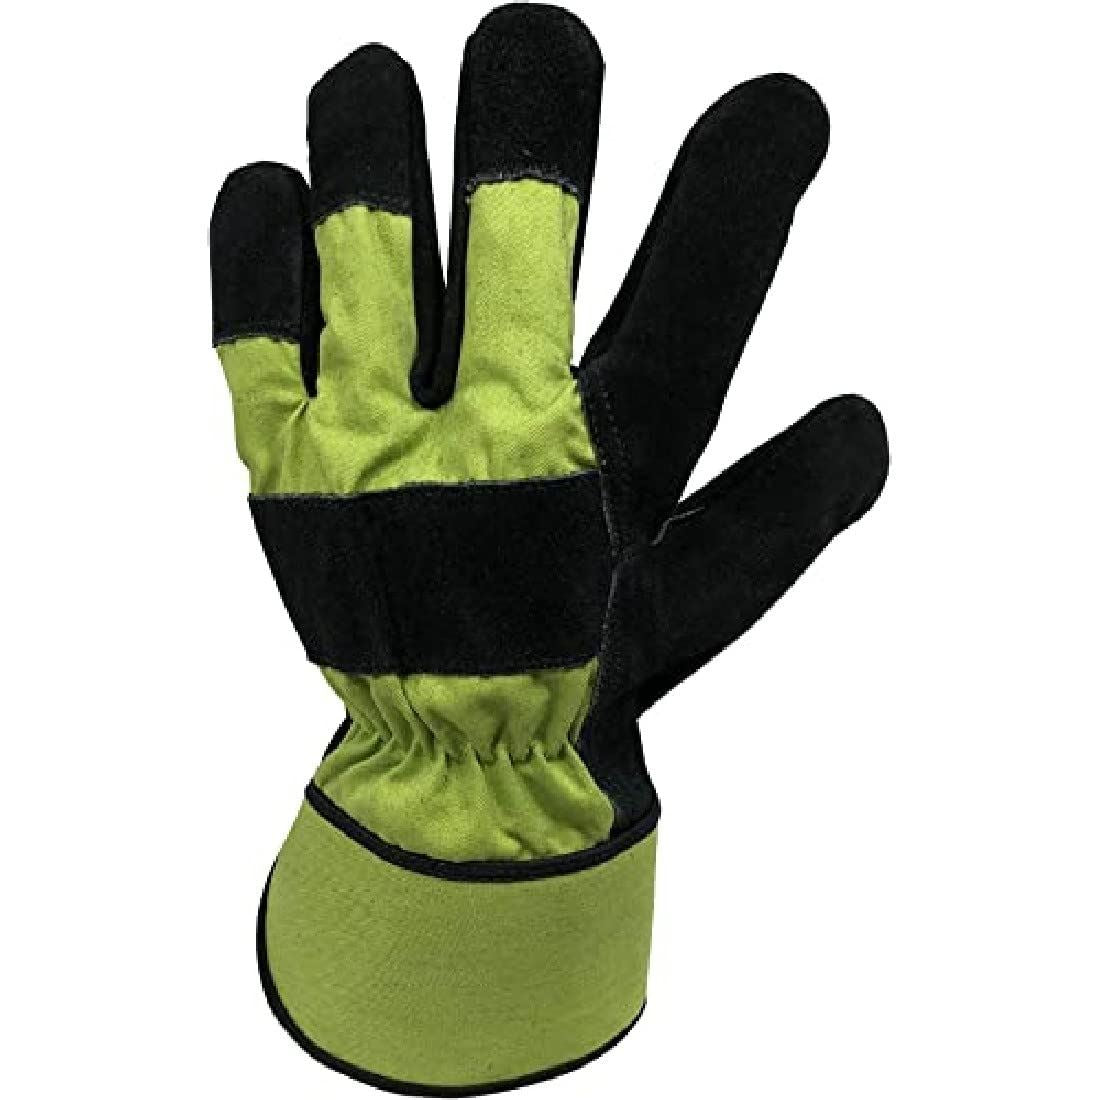 Spear & Jackson Kew Gardens Thermal Lined Rigger Gloves - Large